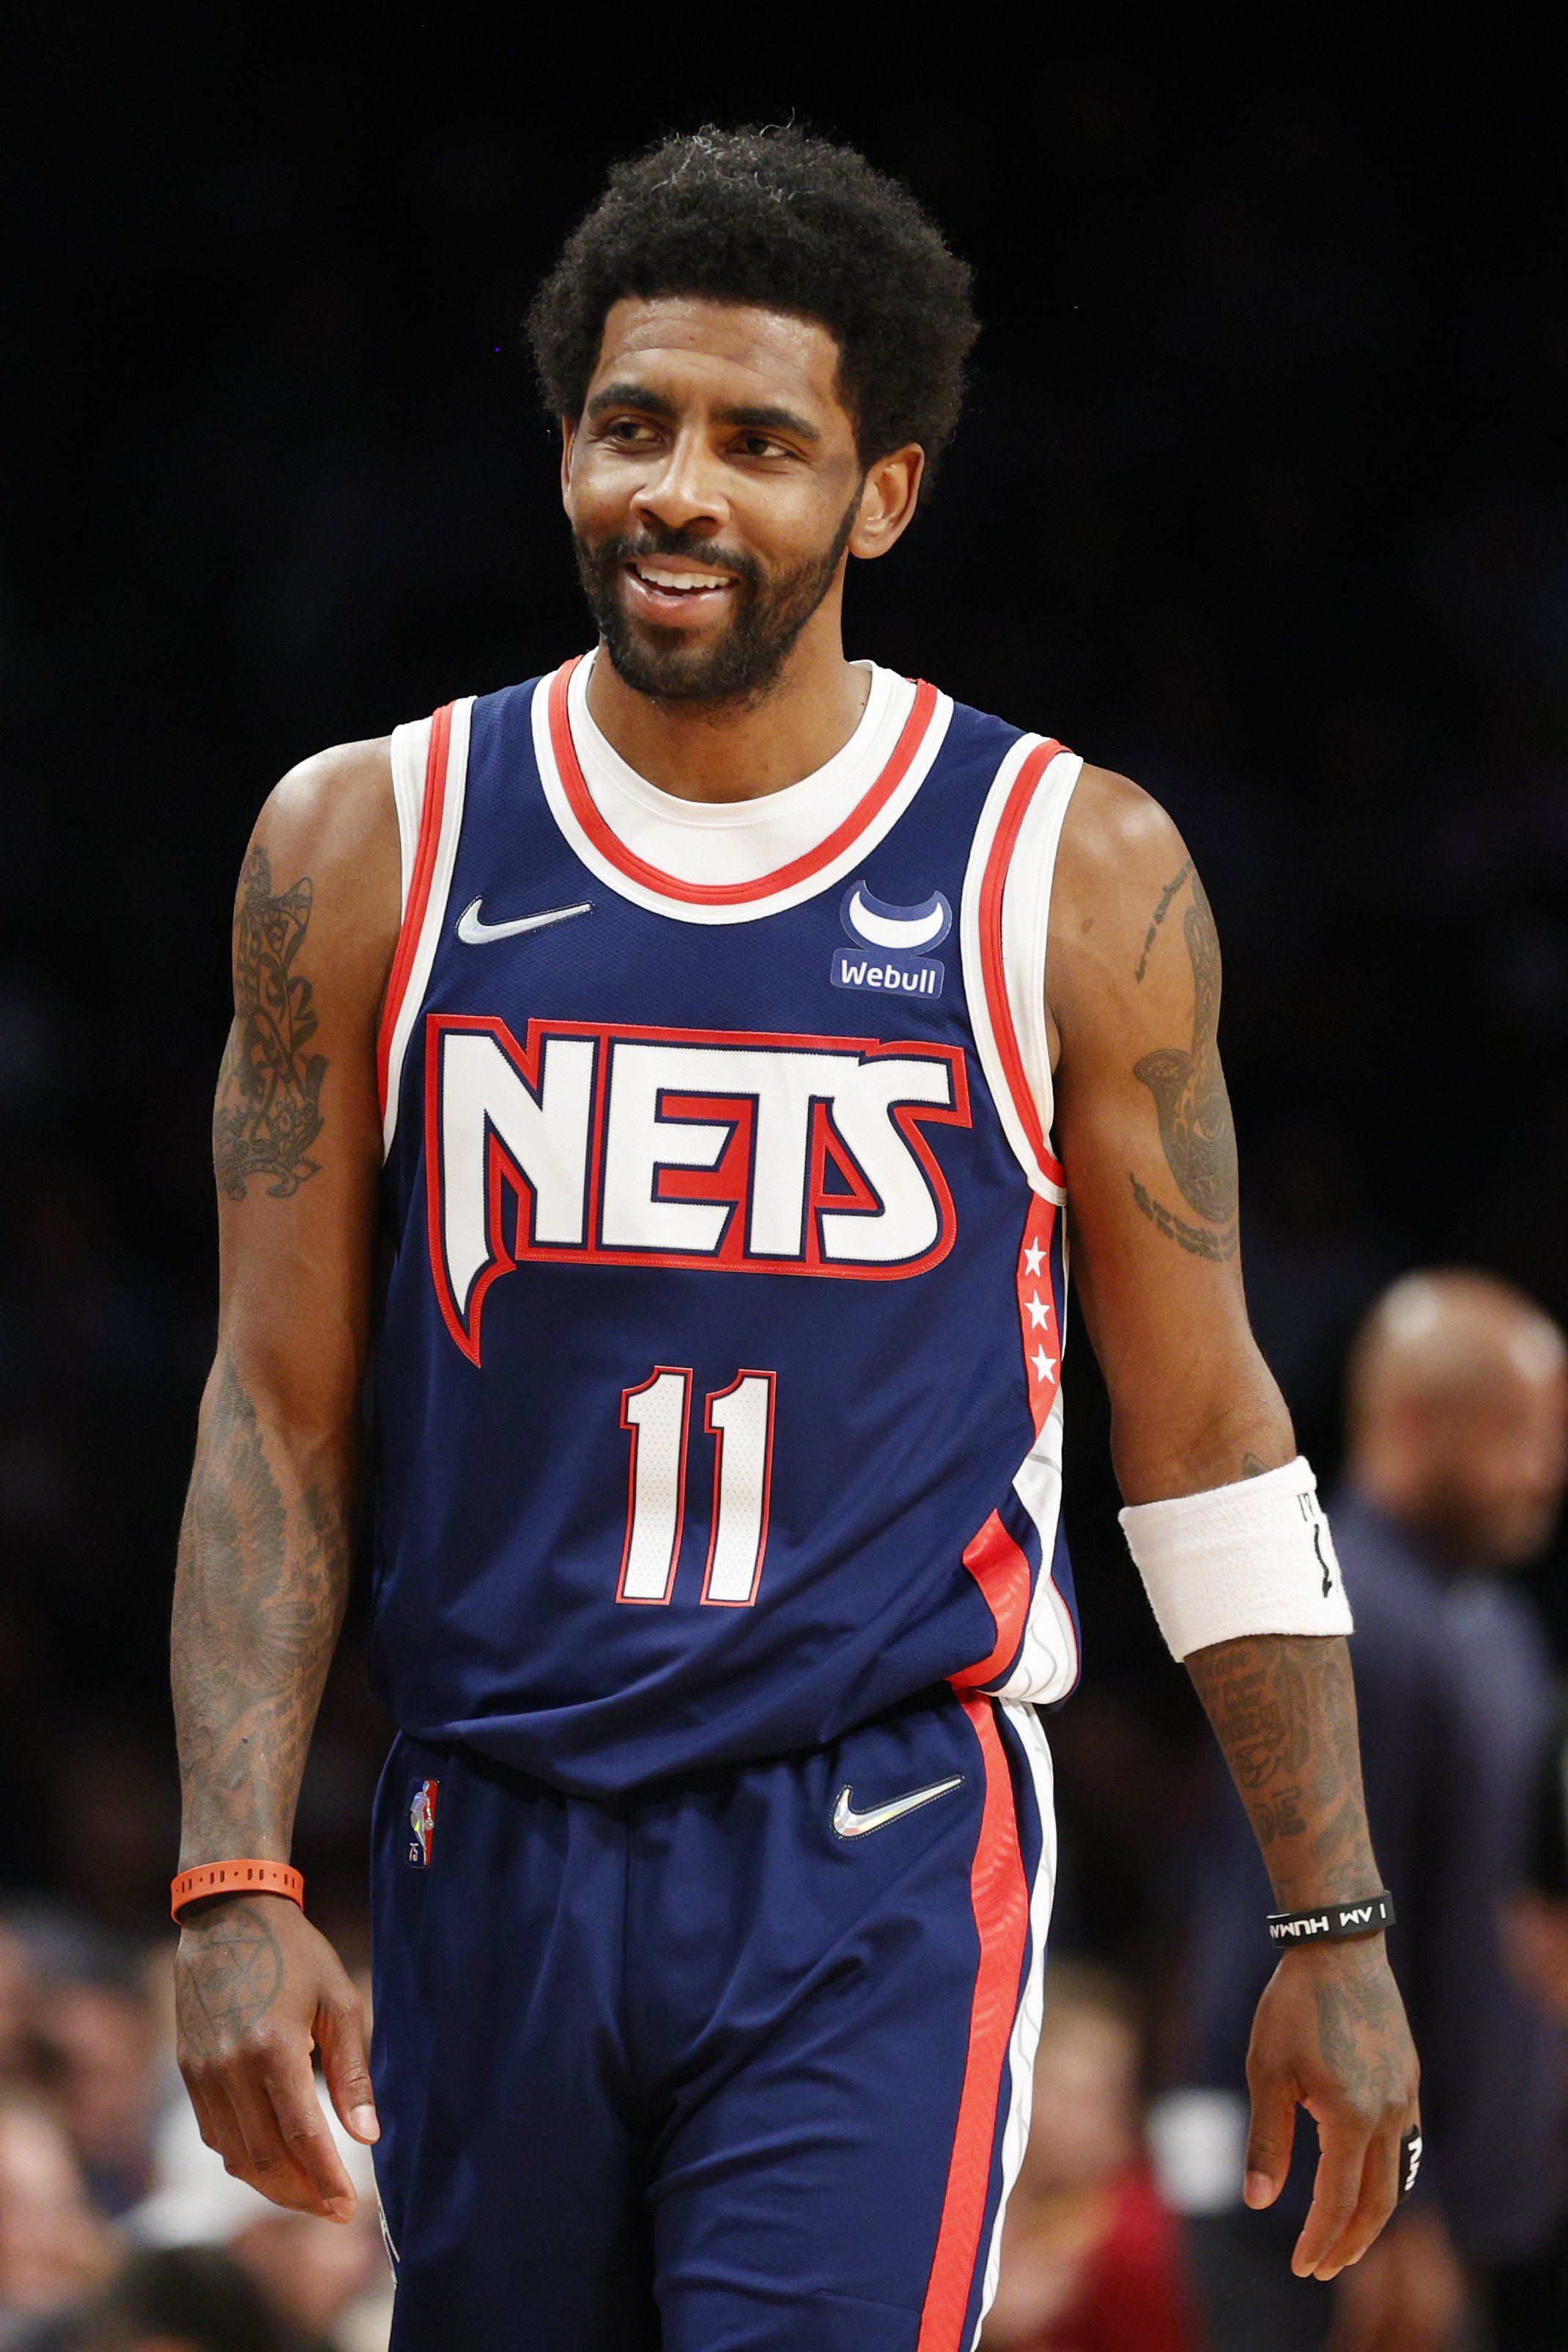 Kyrie Irving of the Brooklyn Nets reacts during the first half of the game against the Cleveland Cavaliers at Barclays Center on April 8, 2022, in Brooklyn, New York City. | Source: Getty Images